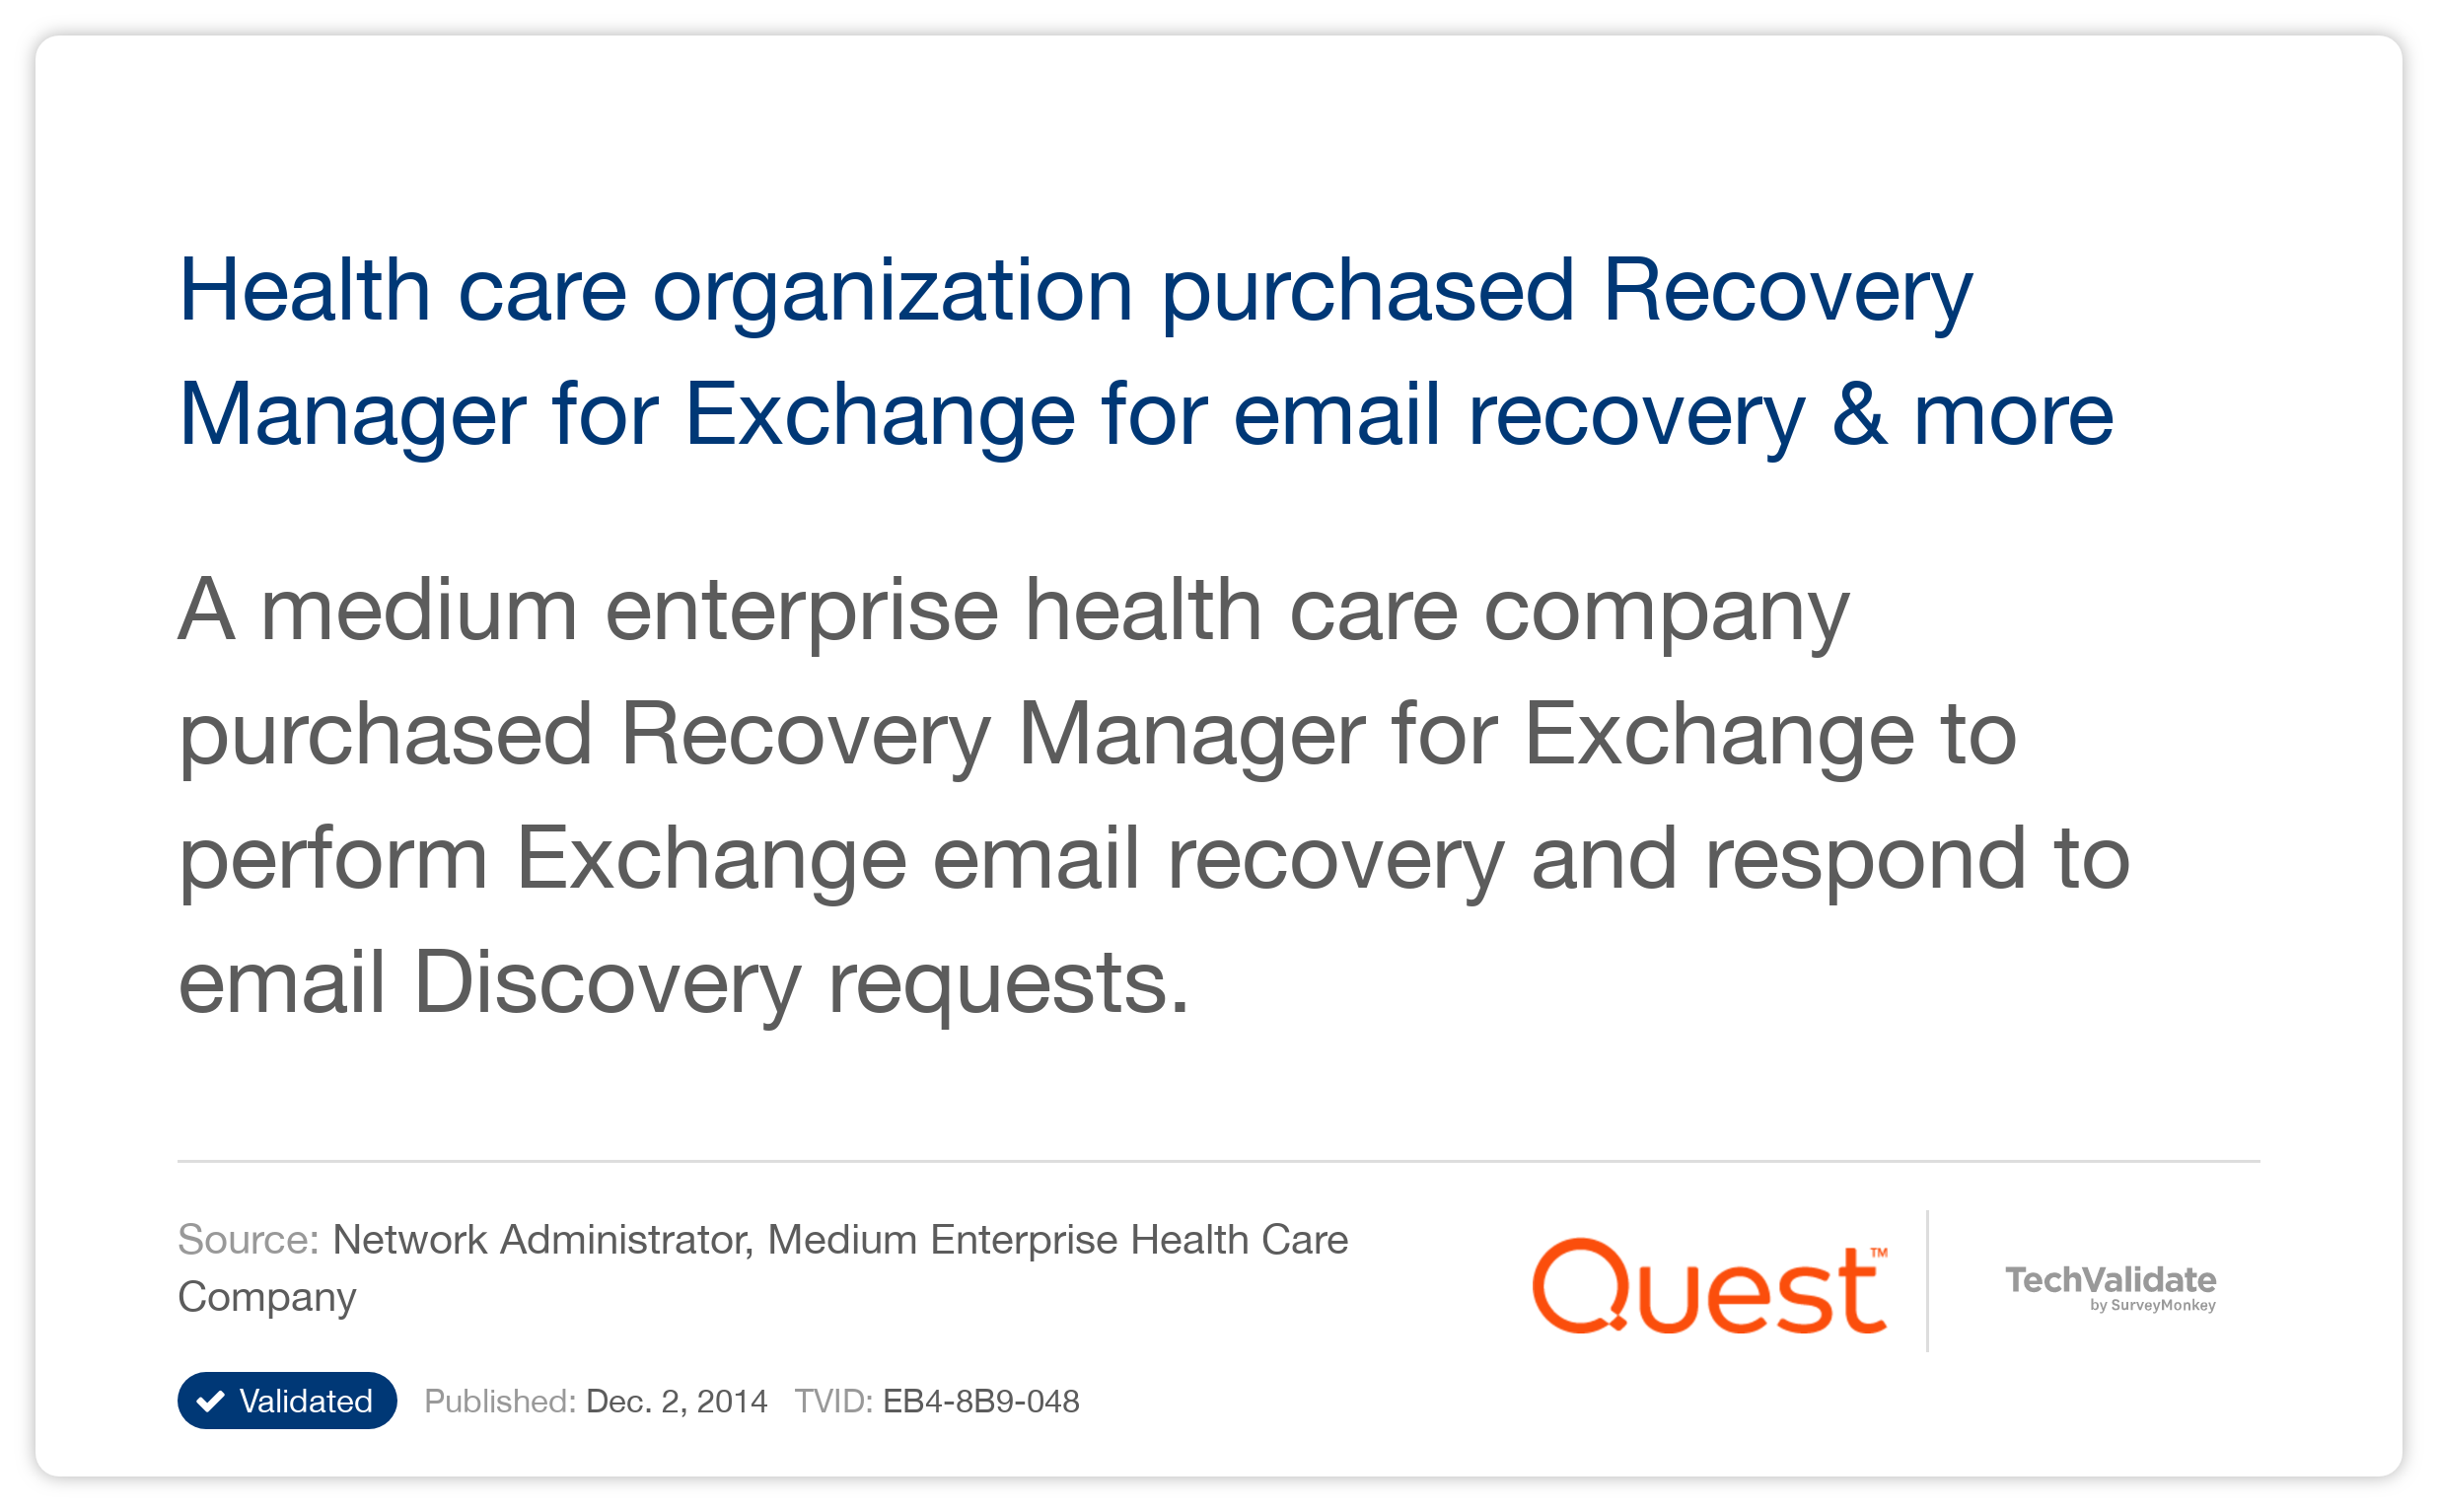 Health care organization purchased Recovery Manager for Exchange for email recovery & more